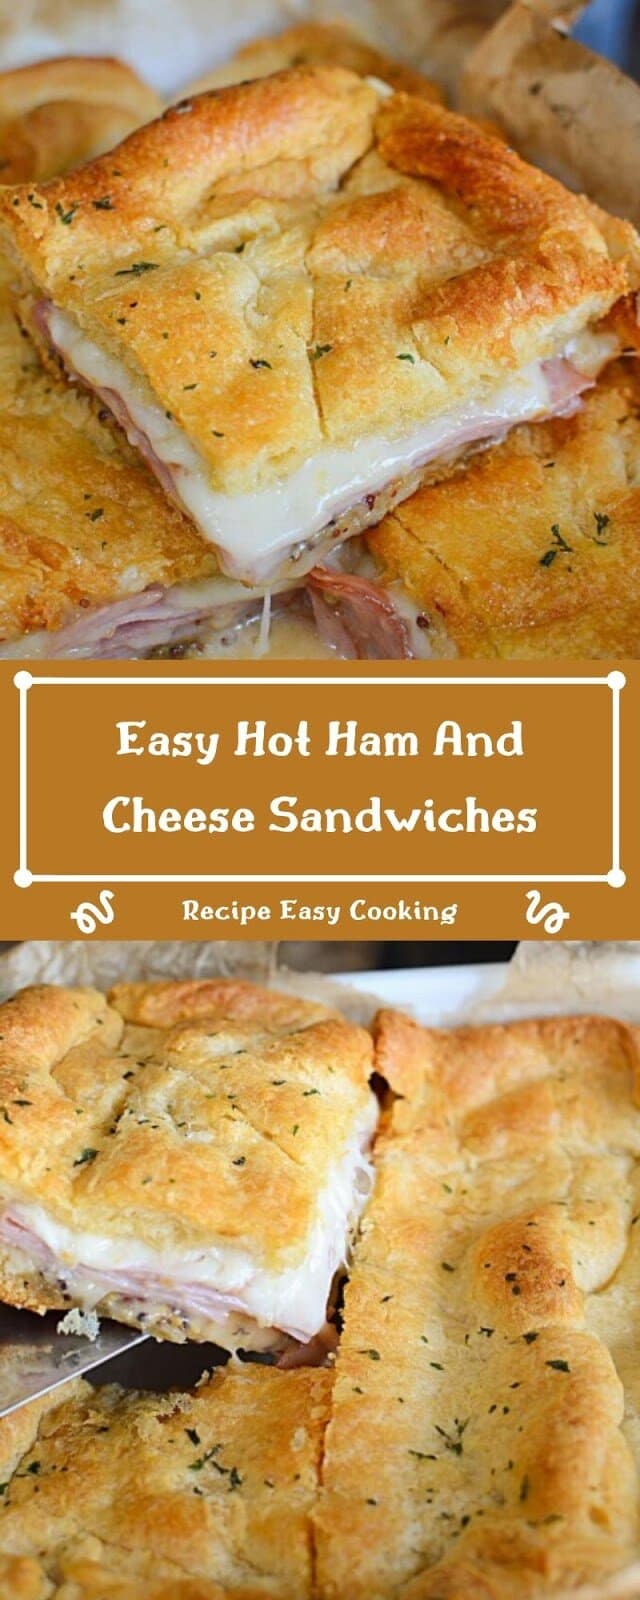 Easy Hot Ham And Cheese Sandwiches